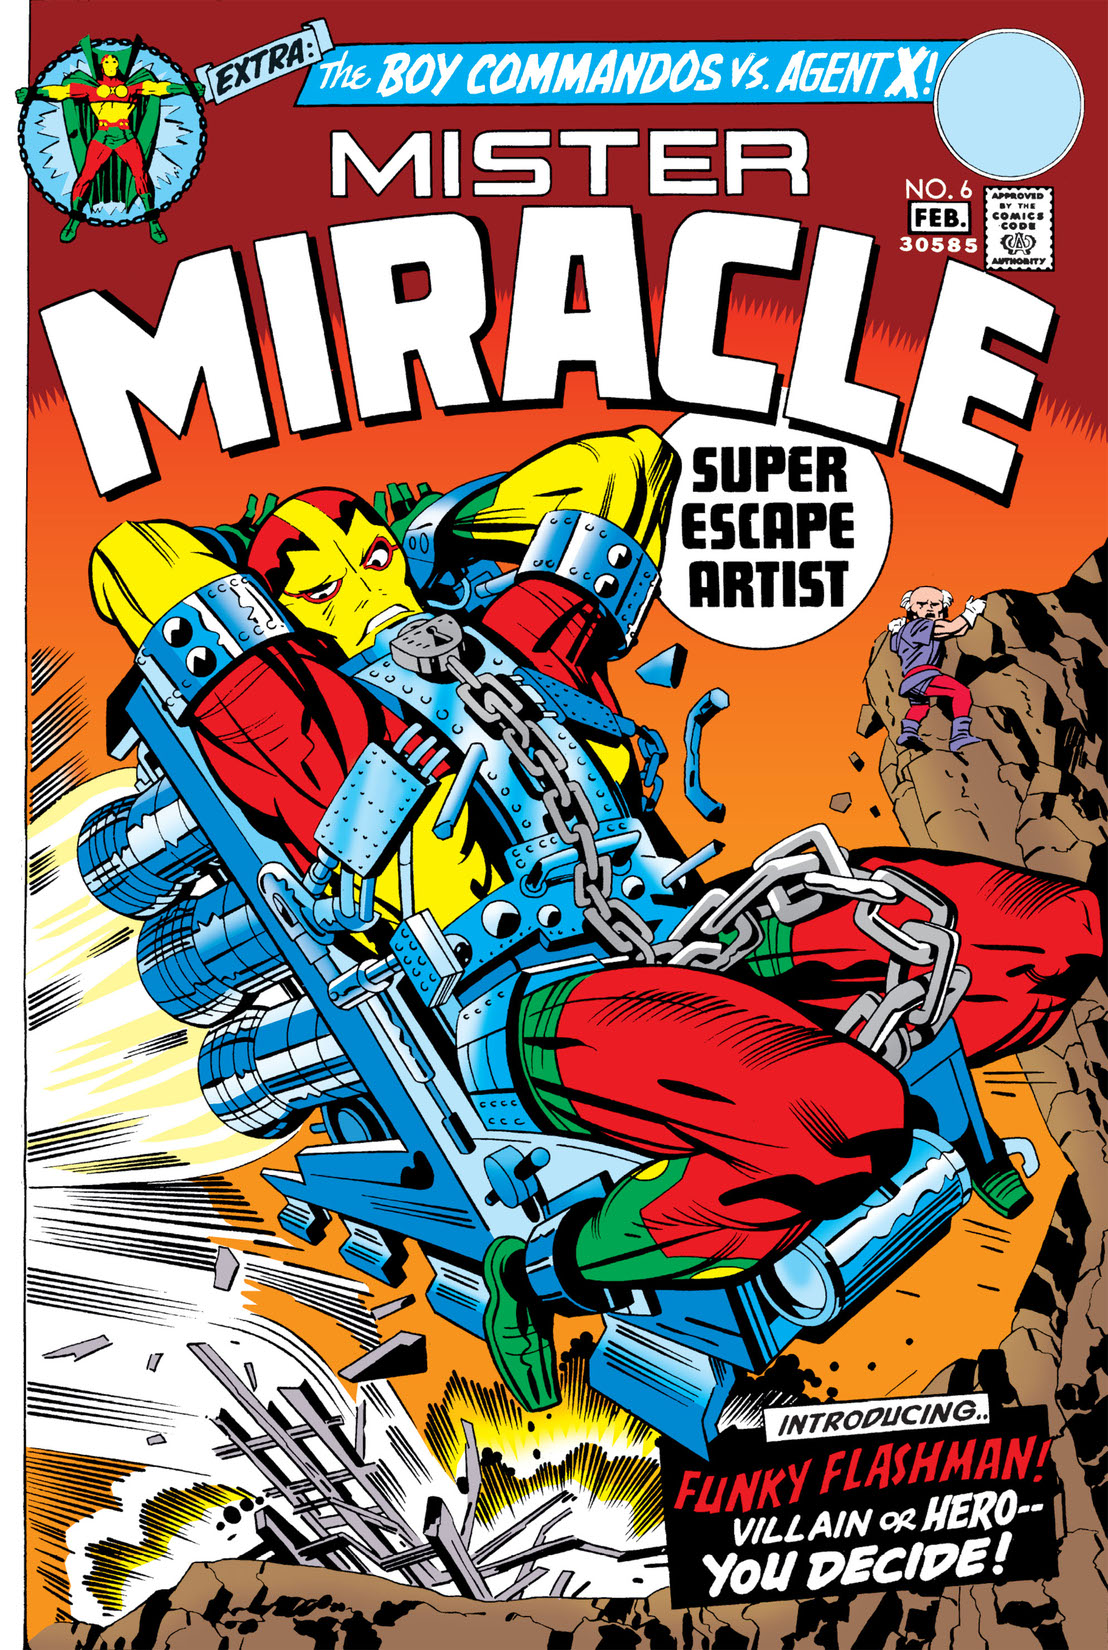 Mister Miracle (1971-) #6 preview images